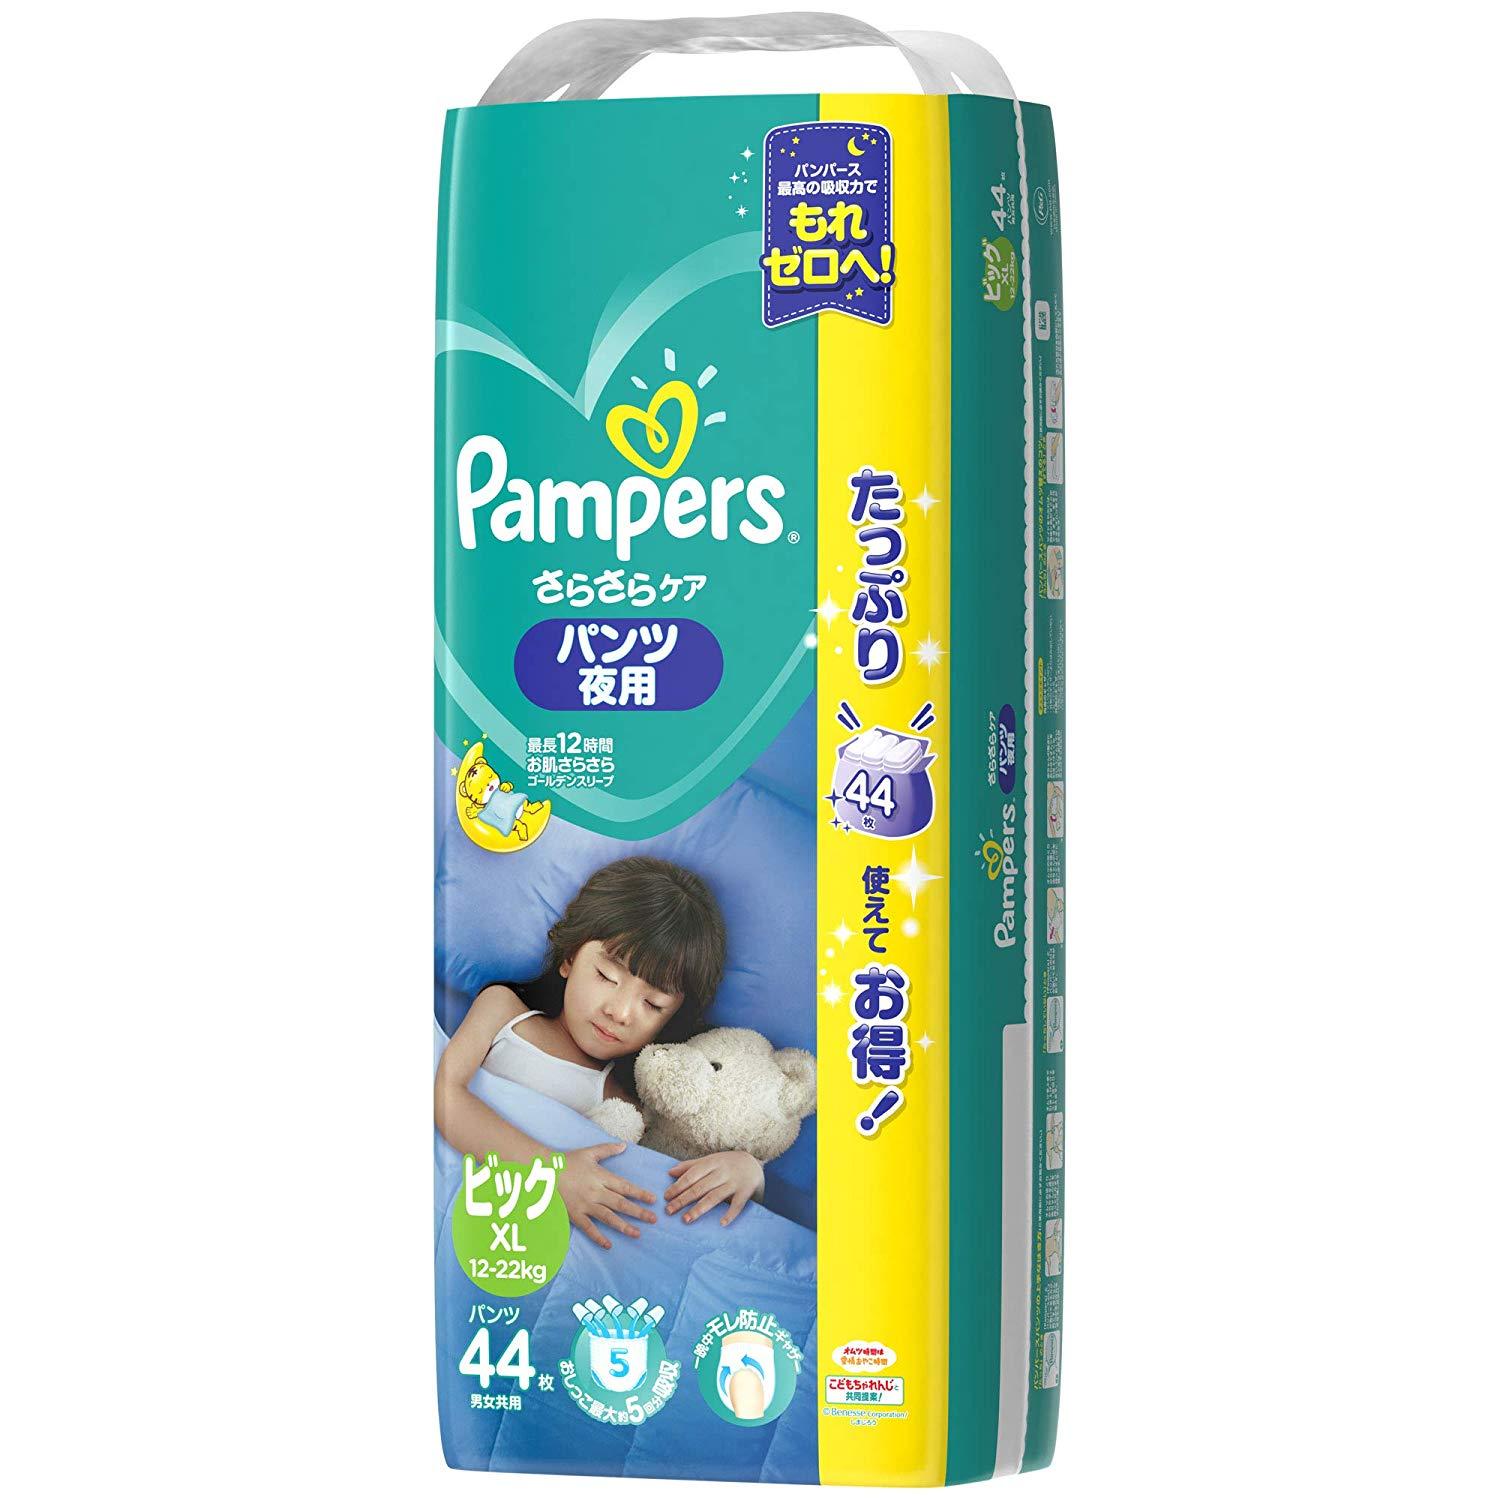 Pampers(pp[X) 炳pcp EgW{ (44) of